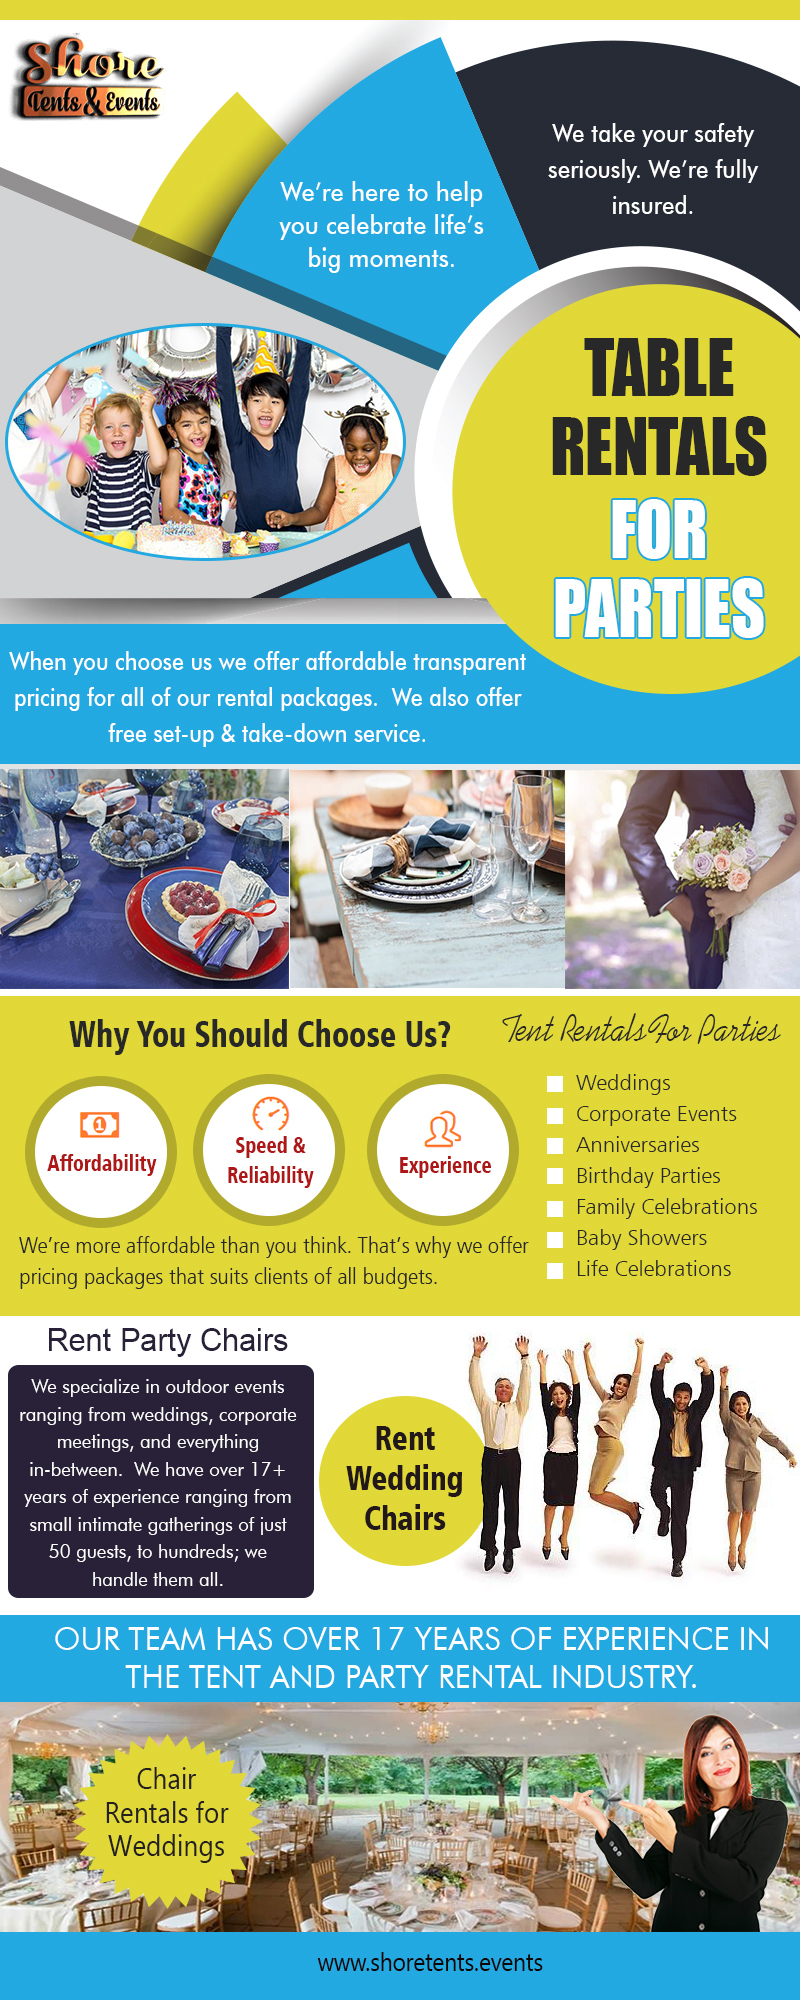 Table Rentals for Parties